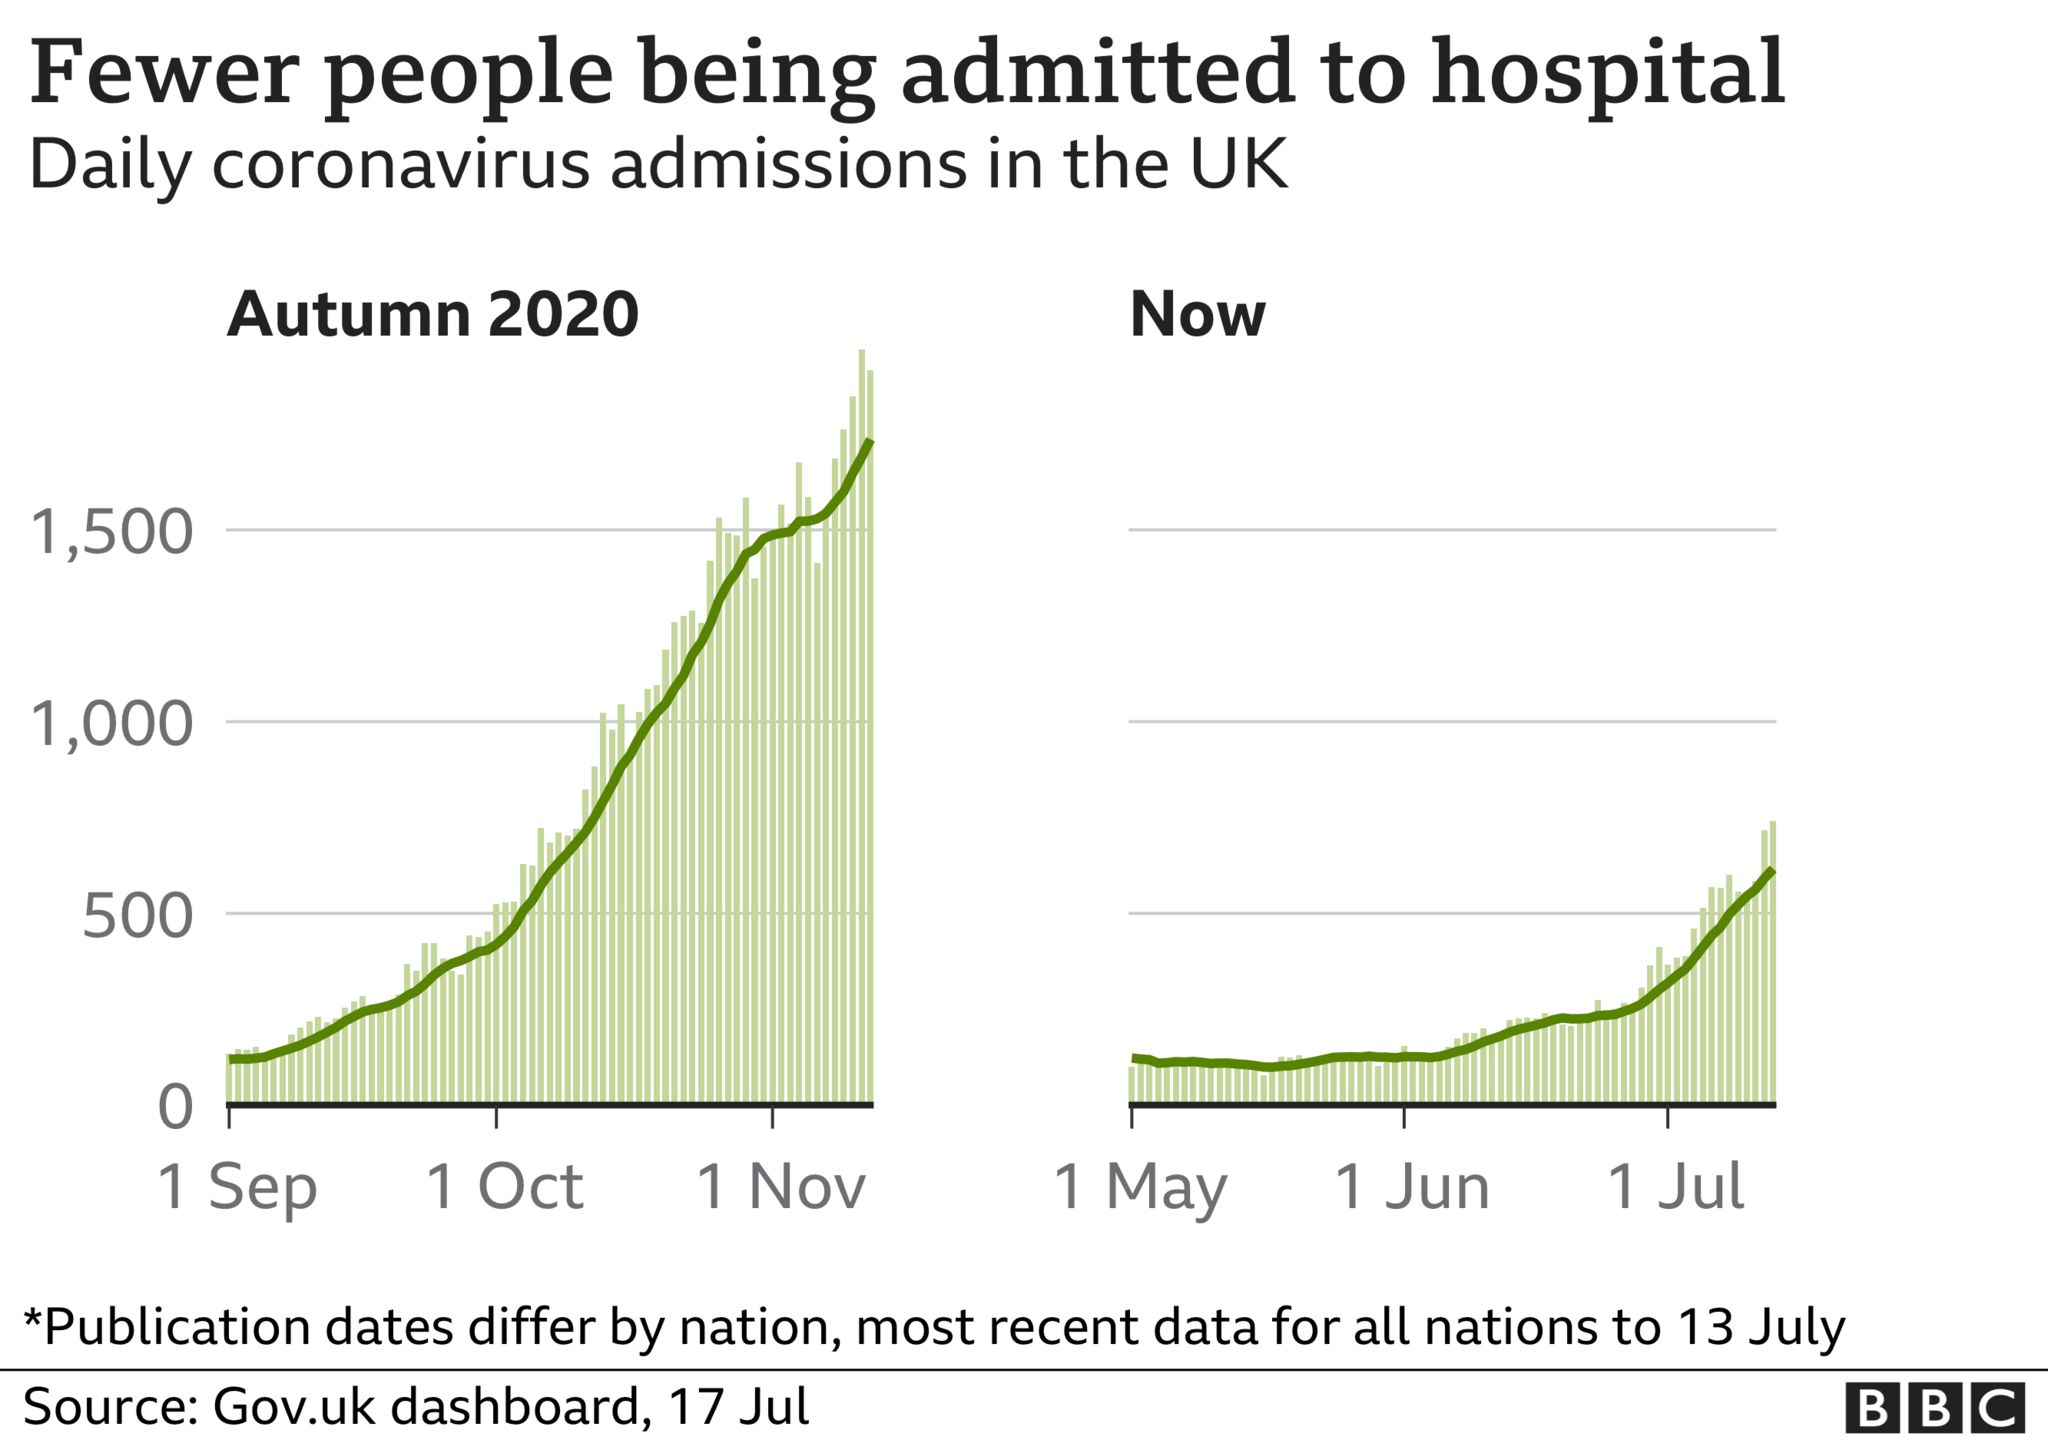 A chart showing fewer people are being admitted to hospital now than in autumn 2020